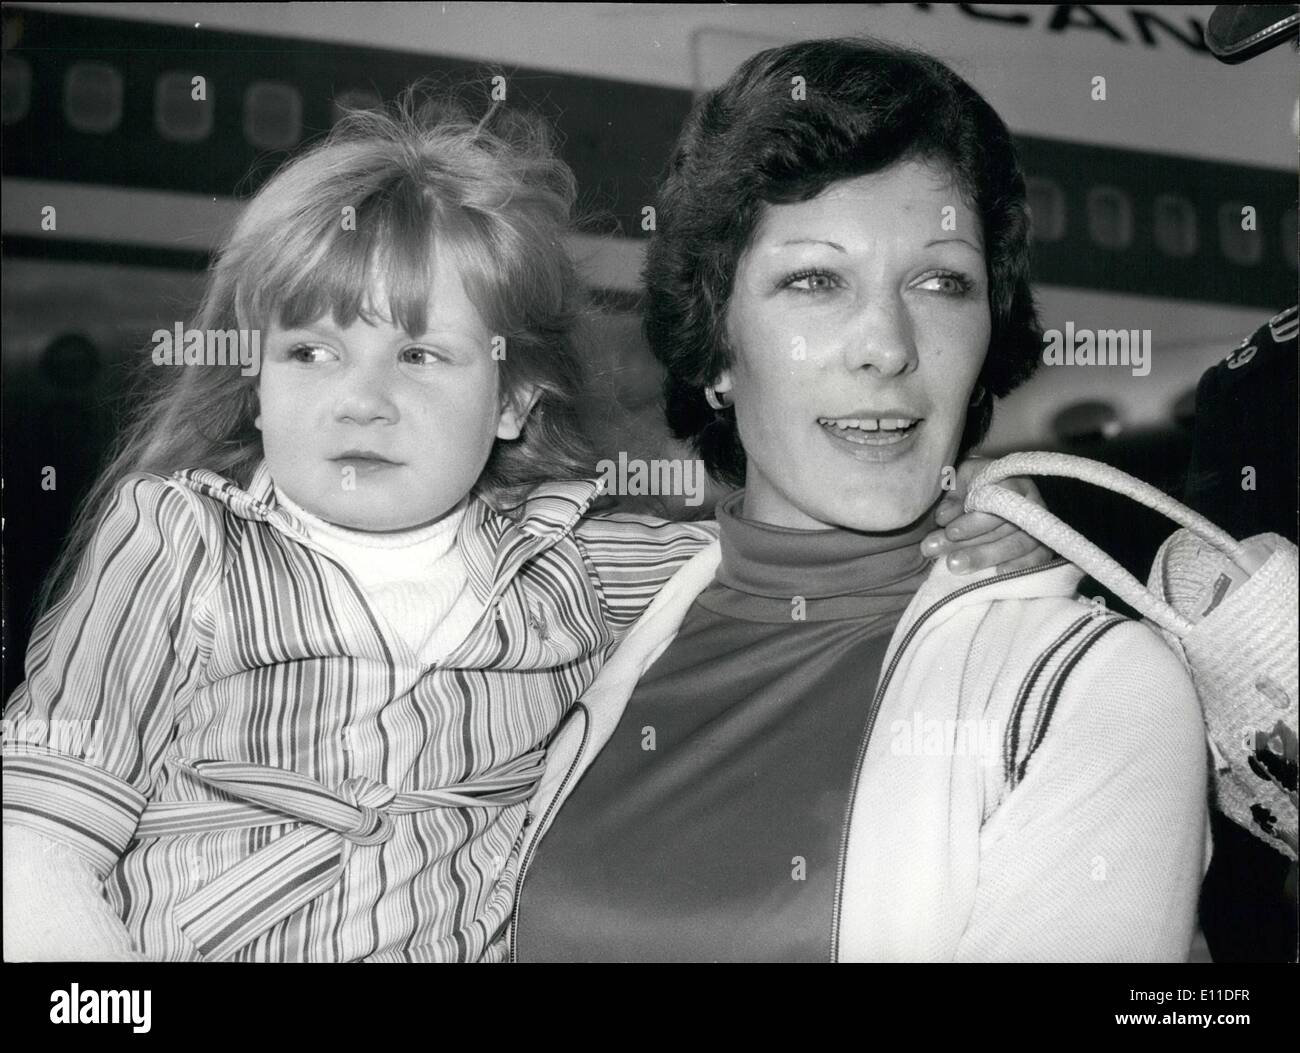 Aug. 08, 1977 - MOTHER OF HEART GIRL FINDS NEW LOVE IN SOUTH AFRICA: Mrs. Helen Pieri, 40, at Heathrow Airport with her daughter Katrina, aged 5, after arriving from South Africa where Dr. Christiaan Barnard had performed a heart operation on the child. The Pieris' trip was paid for by the people of Bletchley, who raised &pound;5,000 so Katrina could have the operation. Mrs. Pieri stayed at the Capetown home of her cousin Margaret and fell in love with her husband Desmond Holland-Muter Stock Photo